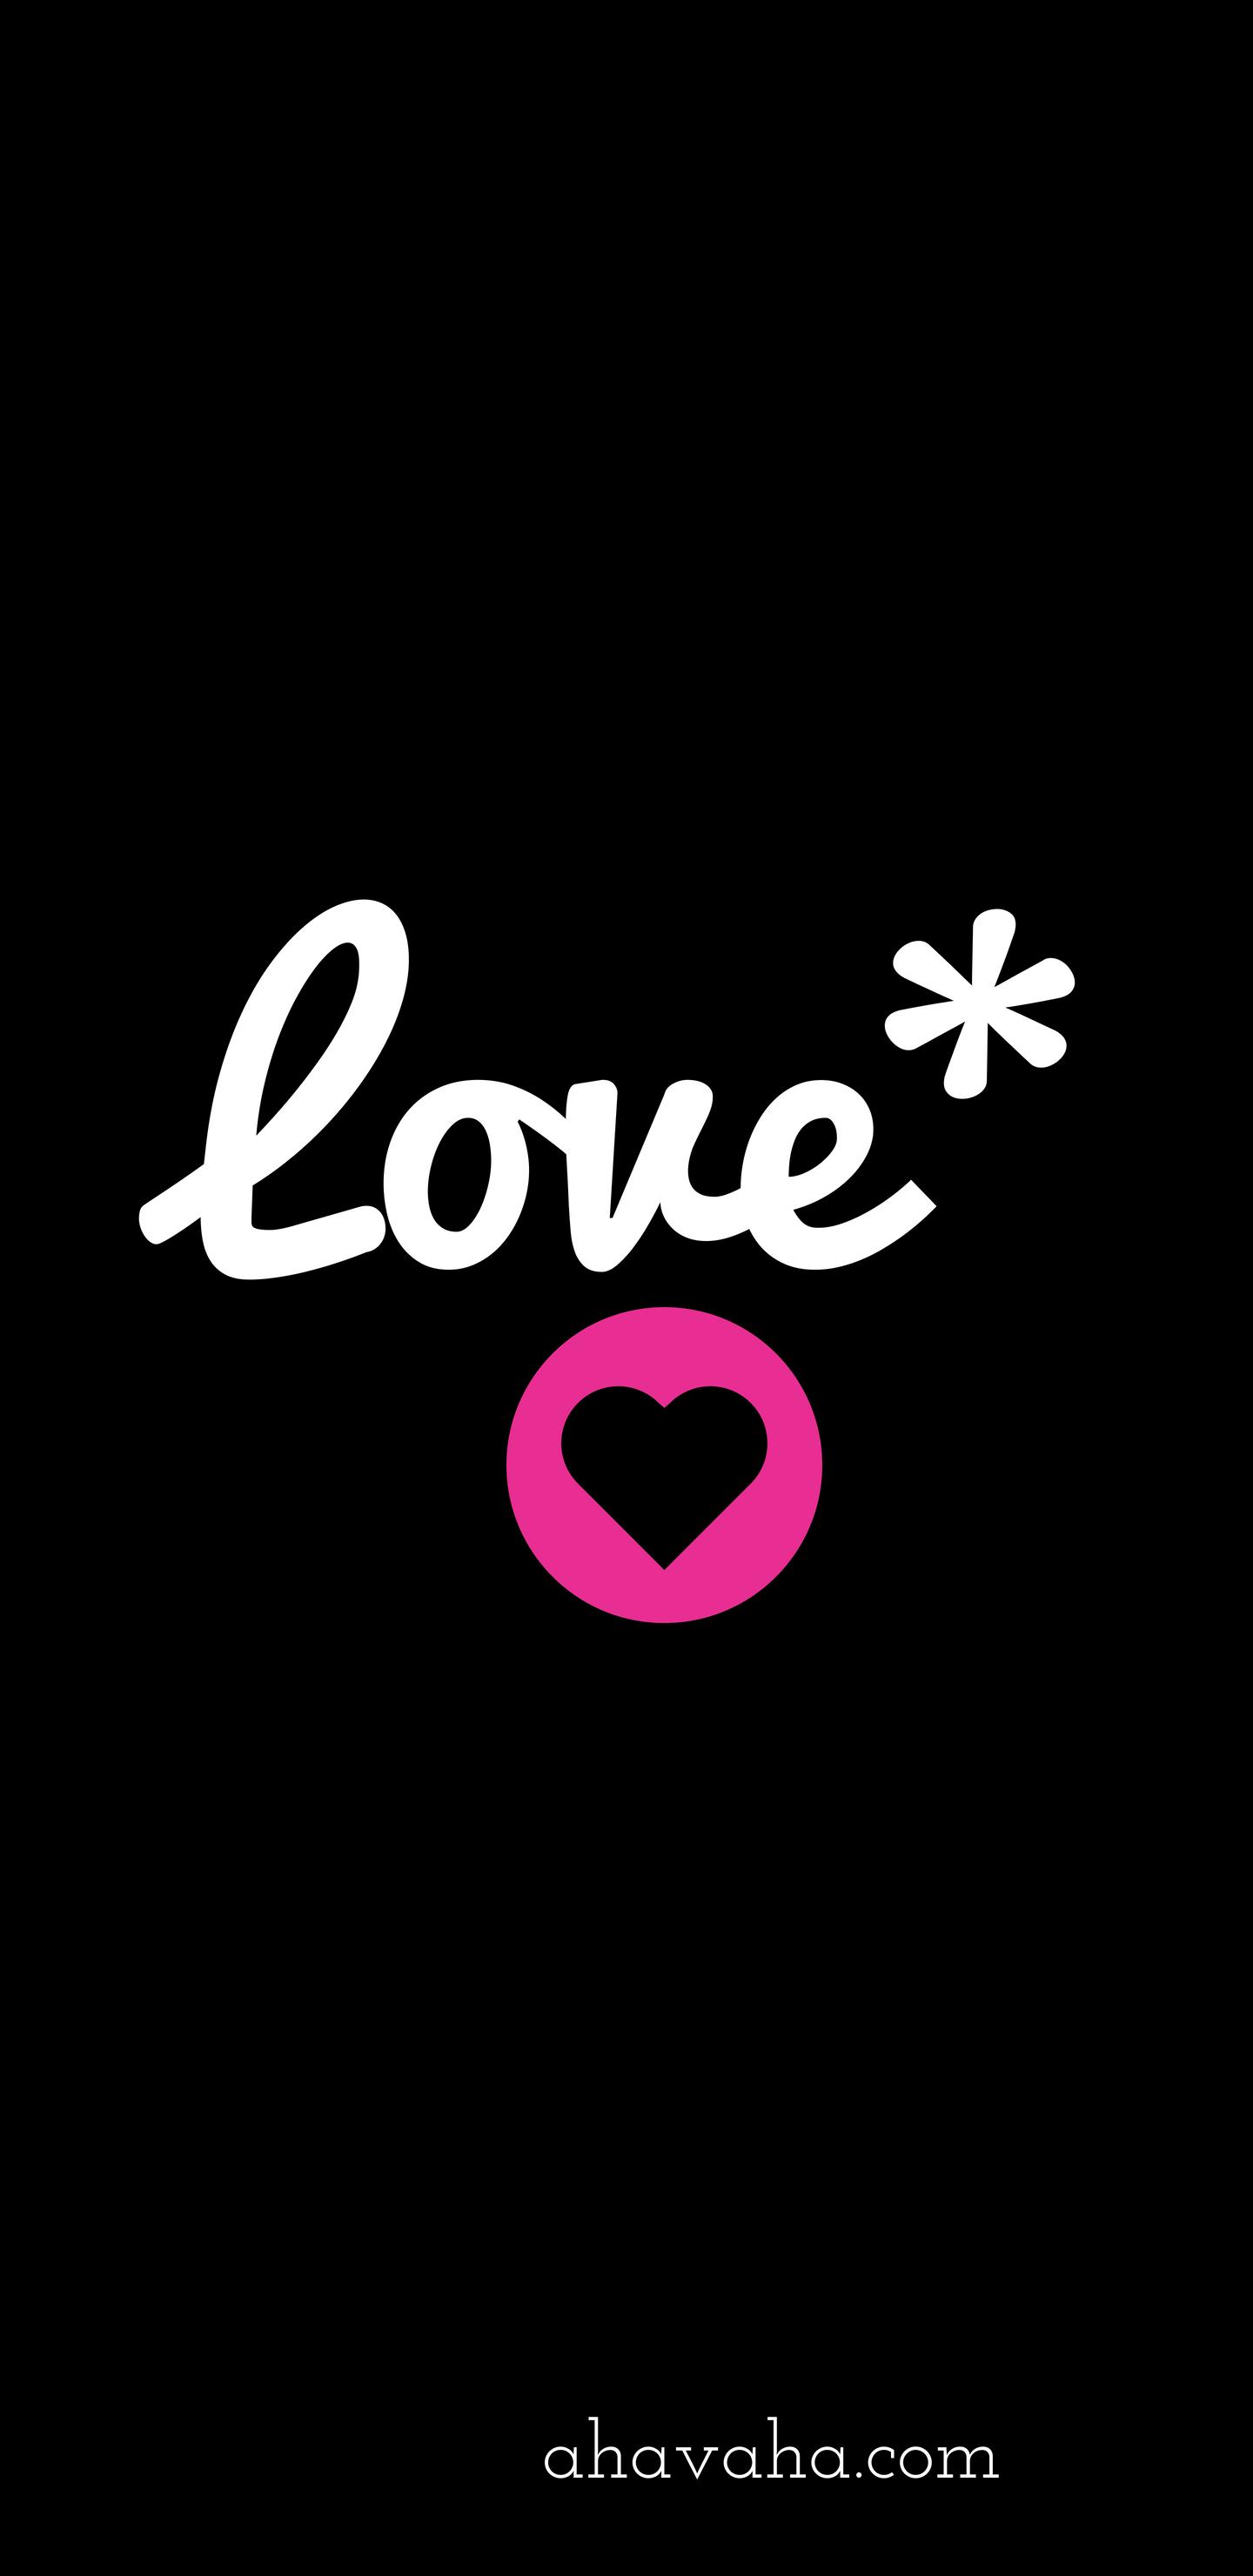 Love Hearts Star Pink White Themed Free Christian Wallpaper